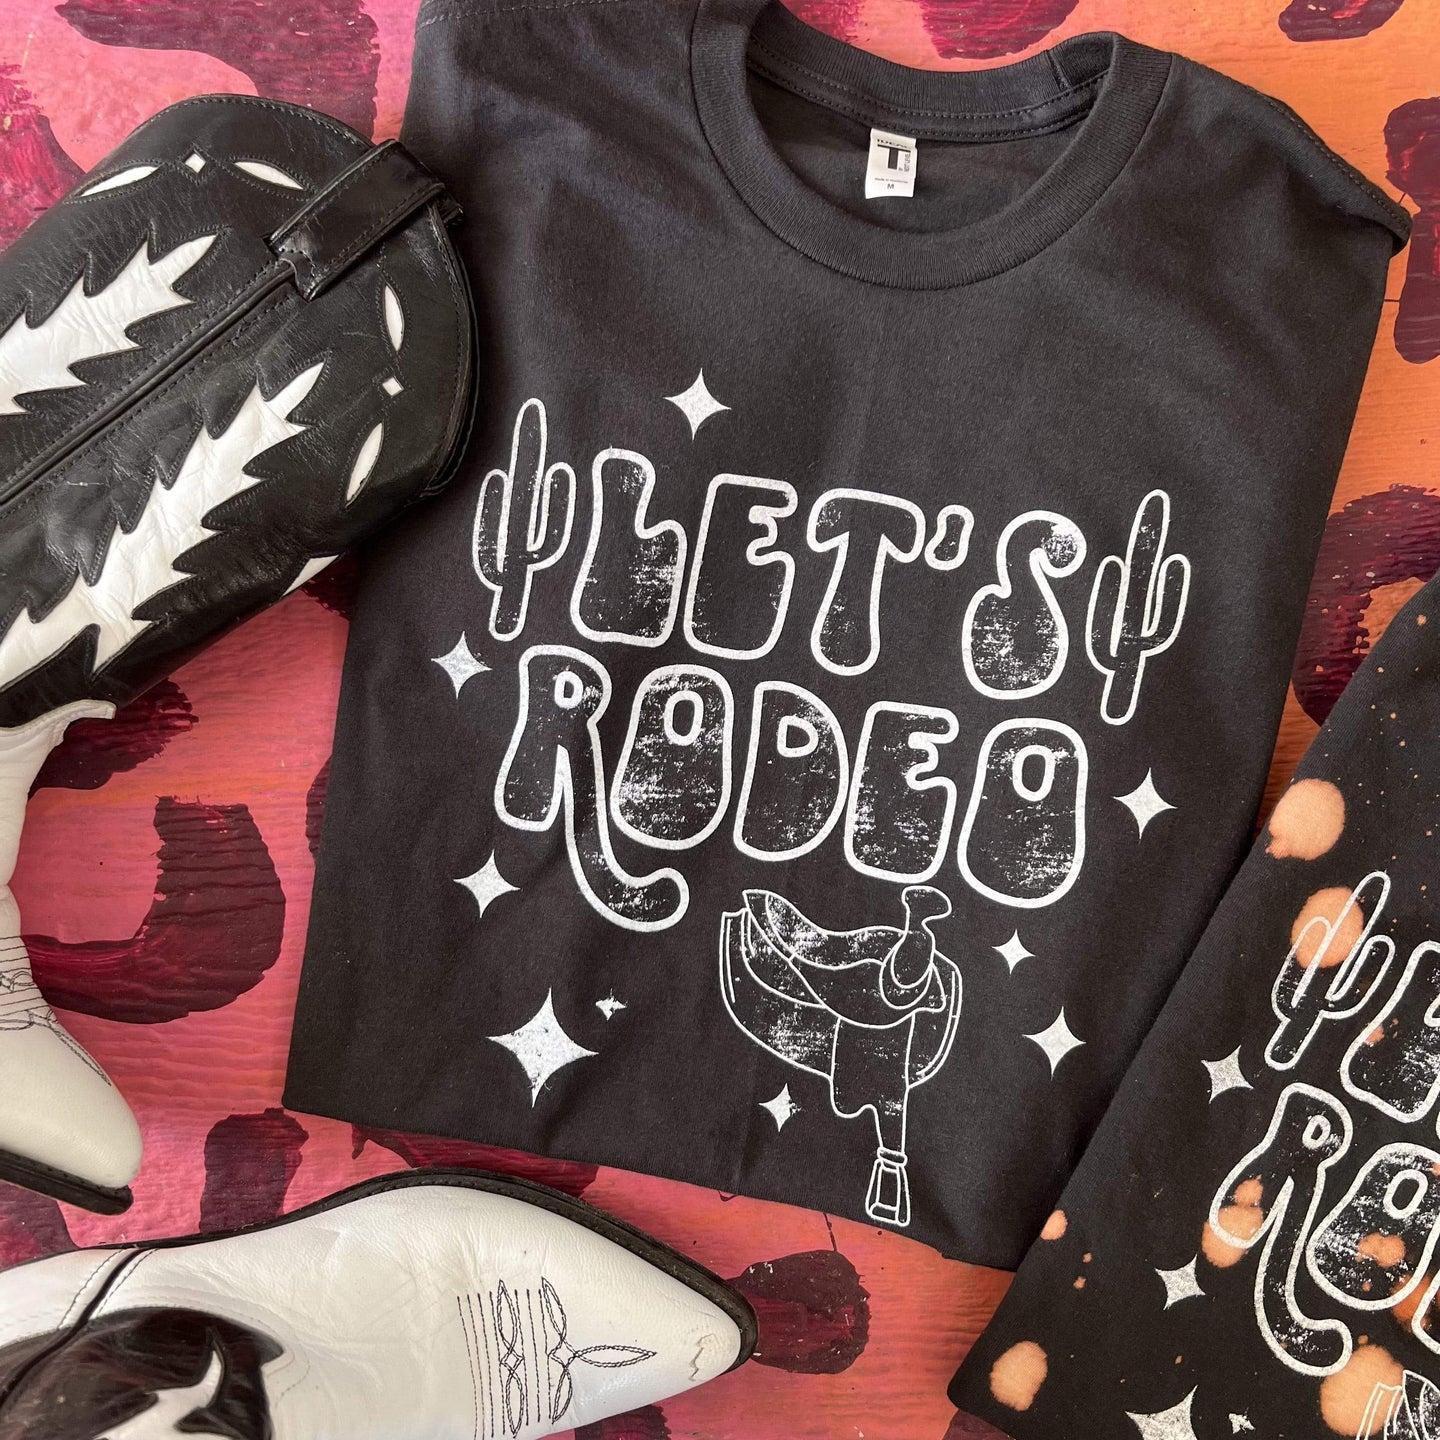 MISSMUDPIE Let's Rodeo with stars and saddle - Black Tee